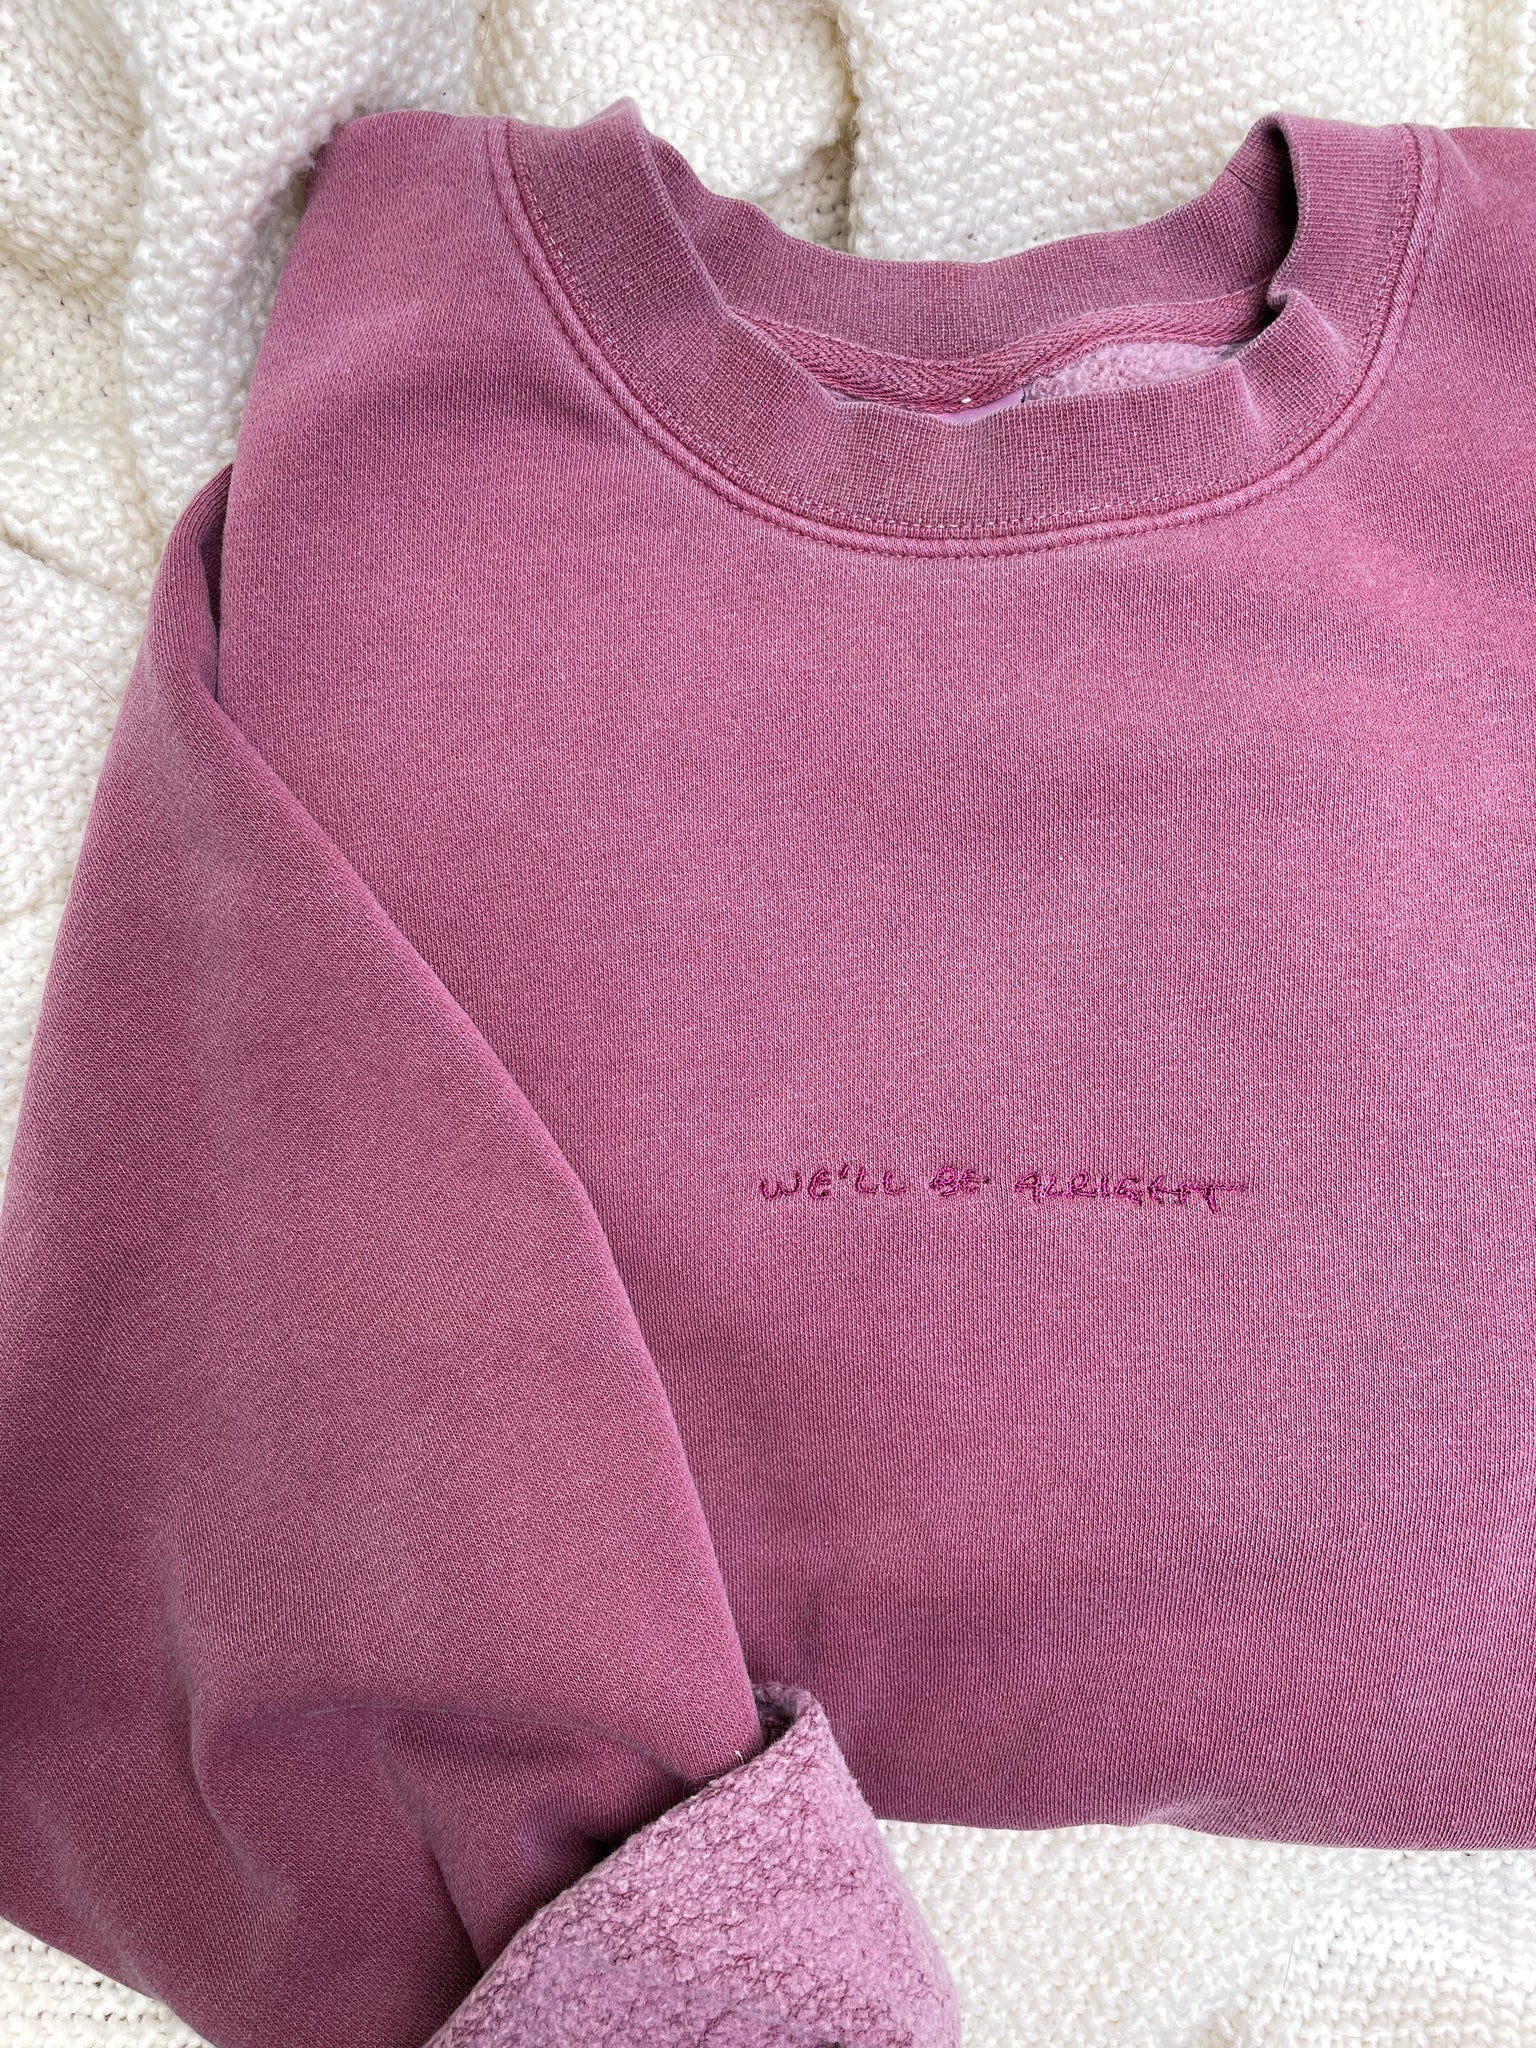 We'll Be Alright Machine Embroidered Sweatshirt